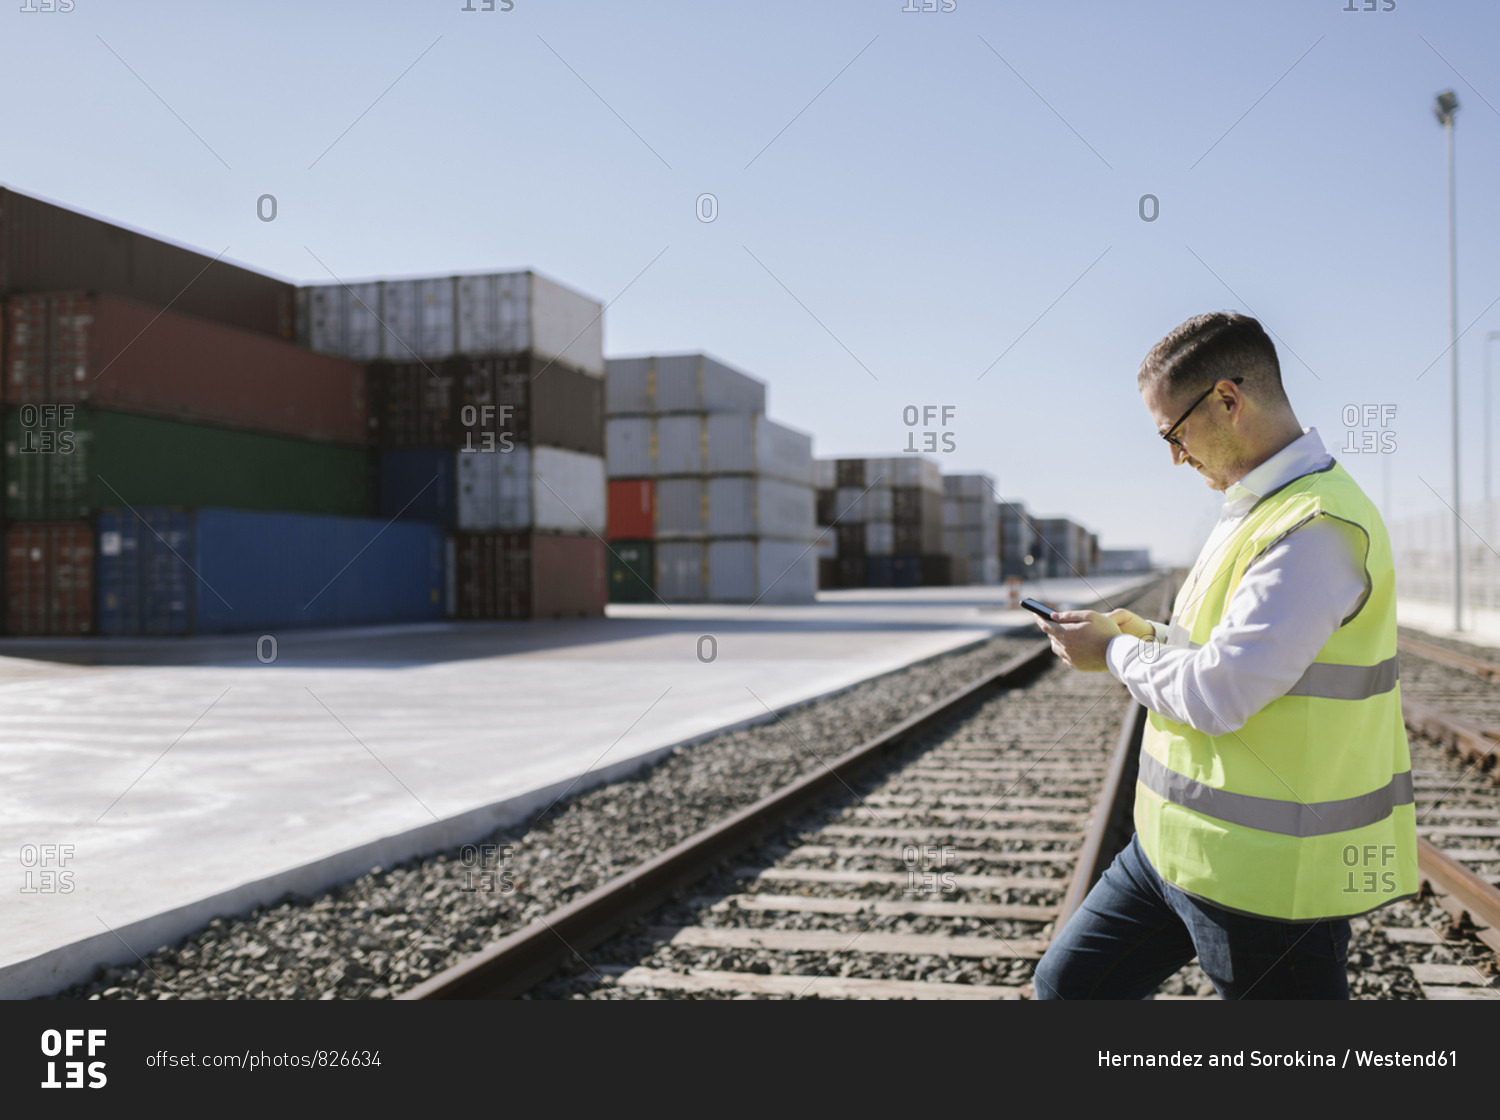 Man on railway tracks in front of cargo containers using cell phone